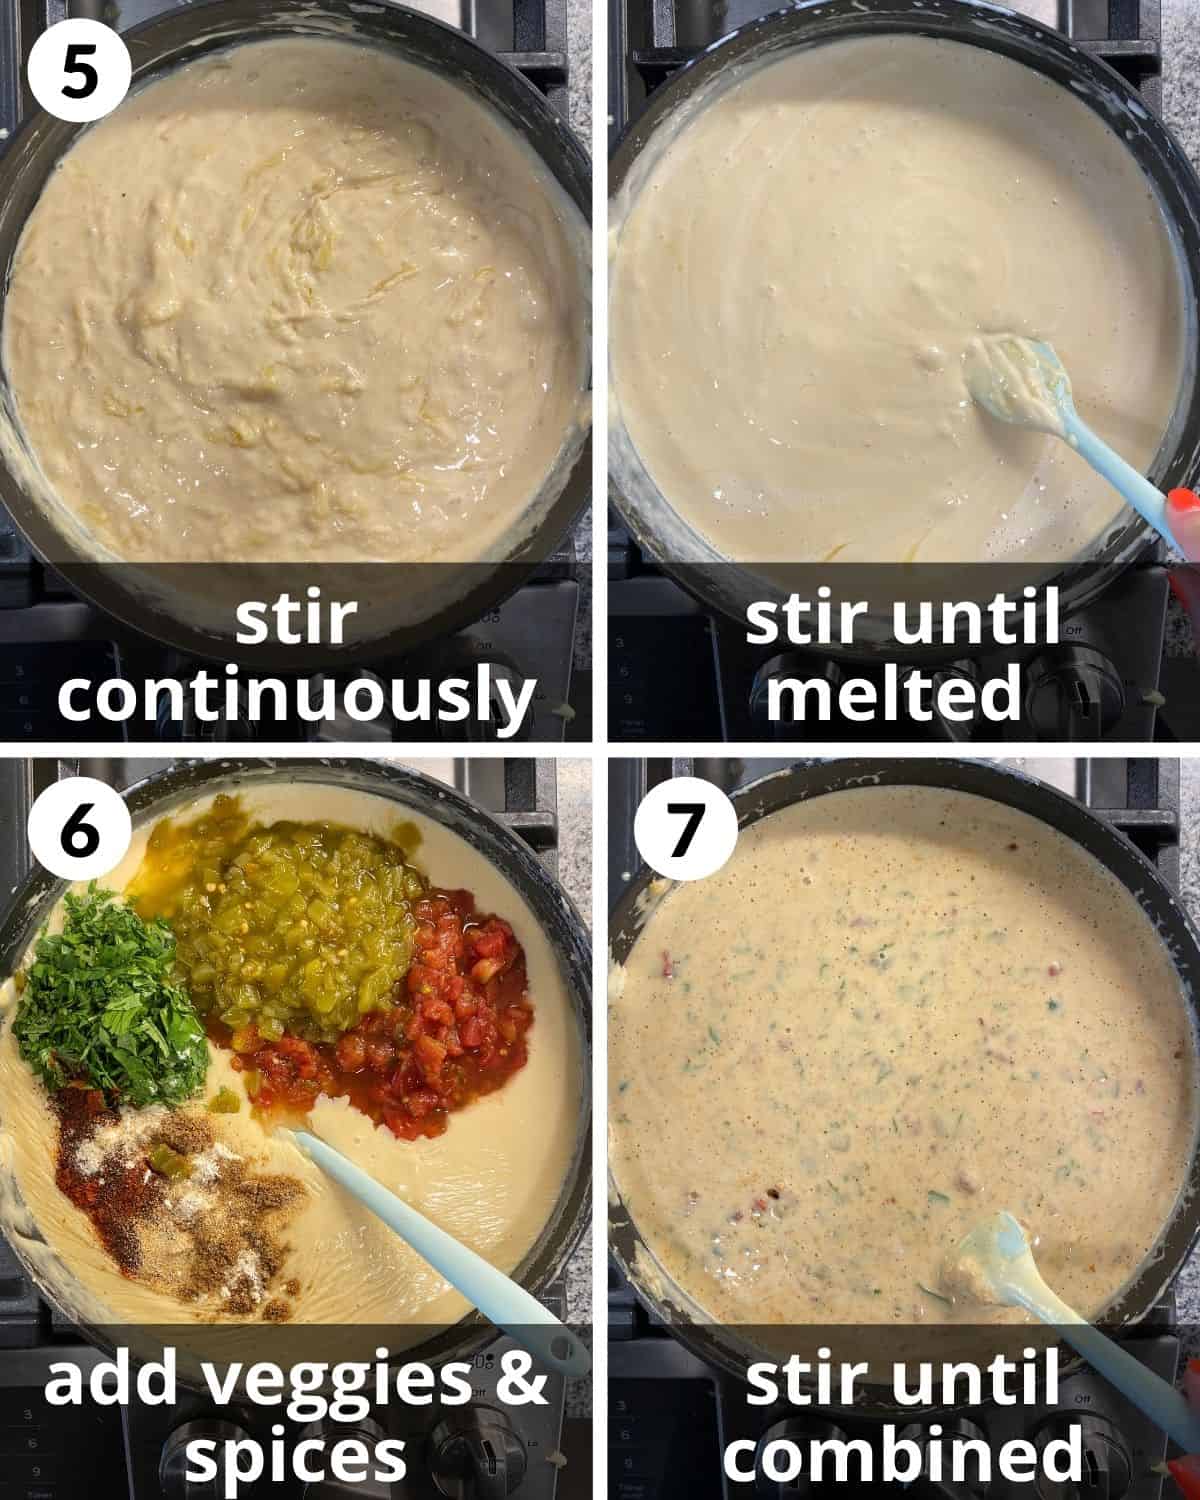 4 photos with text. Cheese almost melted. Cheese completely melted. Spices and veggies added. Mozzarella queso in skillet.